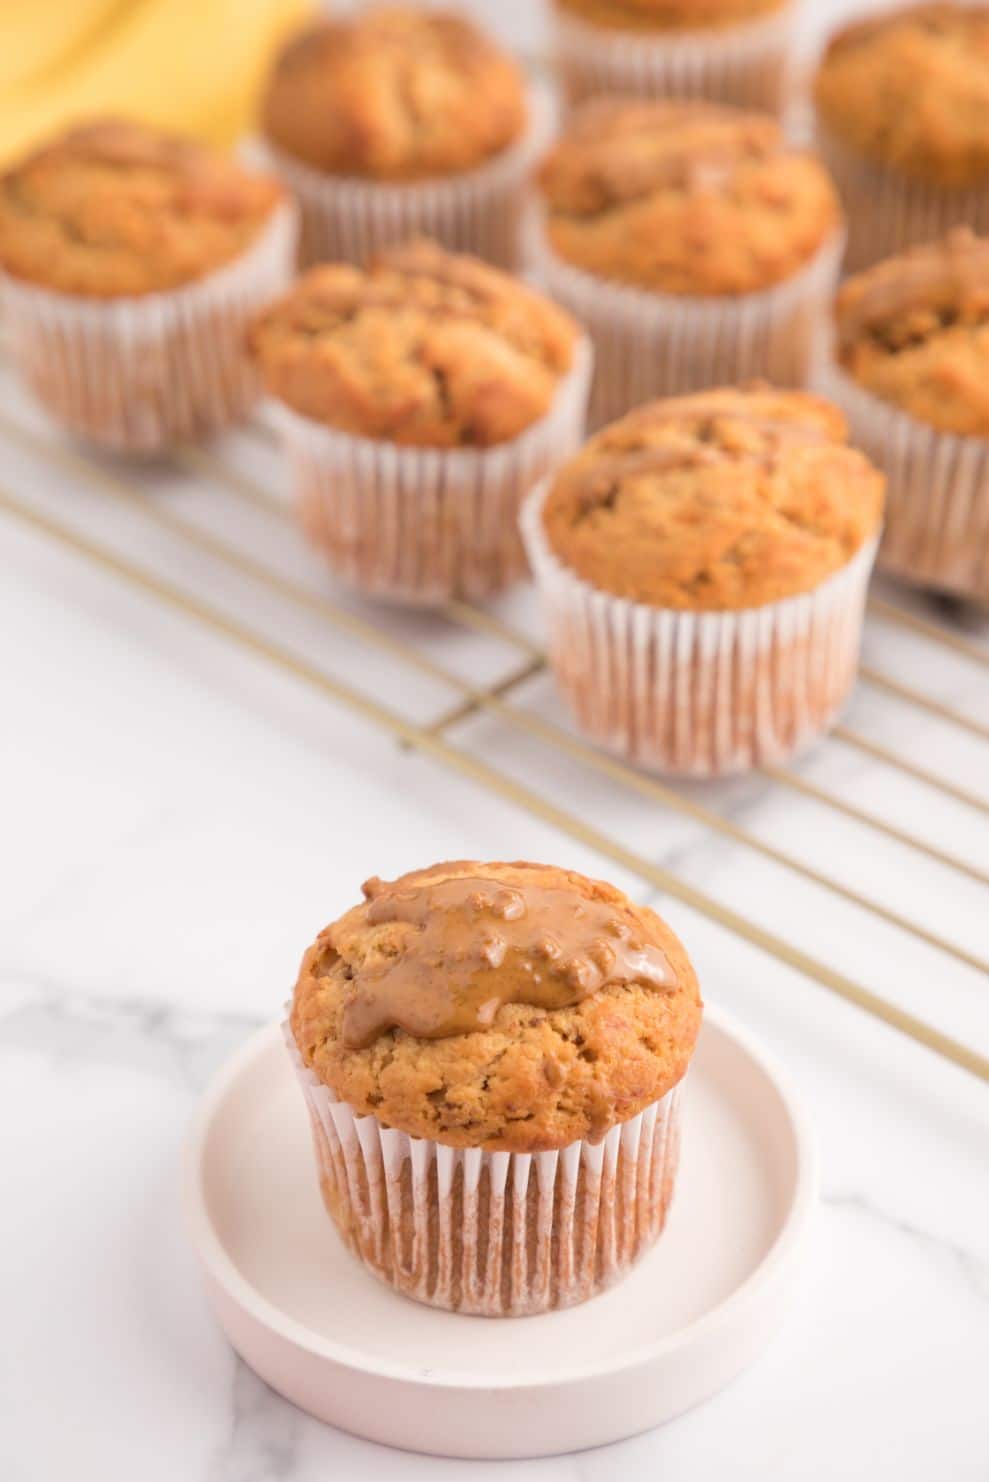 Baked muffins on a cooling rack with a small white plate containing one muffin topped with a Biscoff drizzle